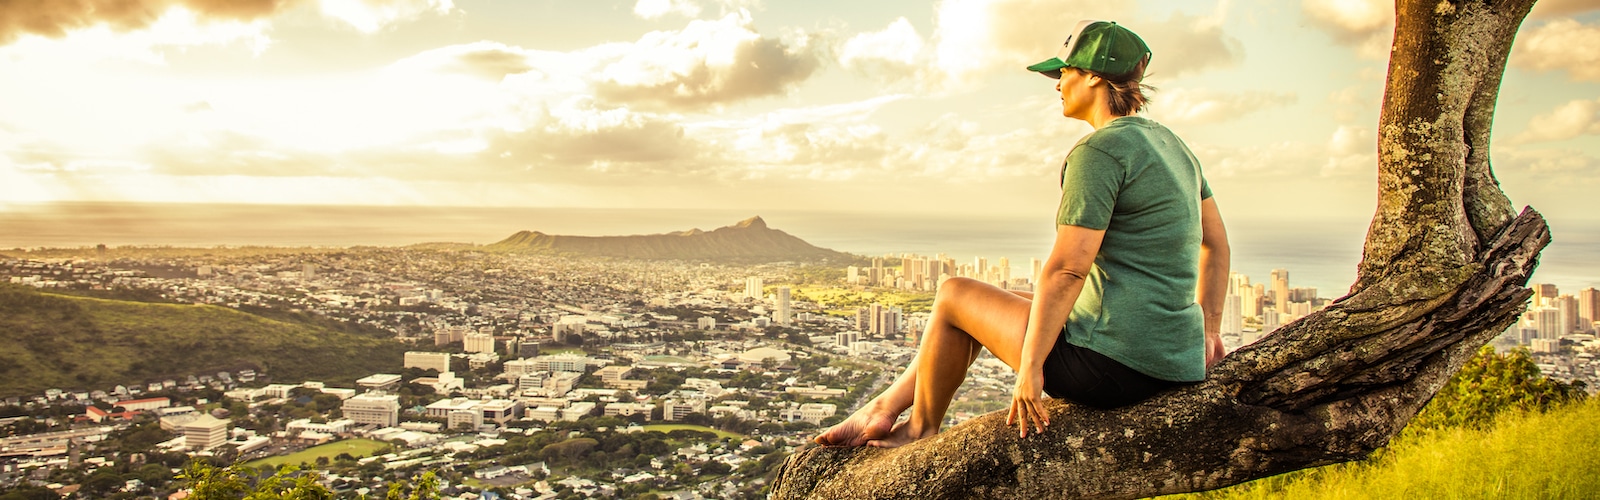 Oahu Private Touring, Best Oahu Tours & Activities